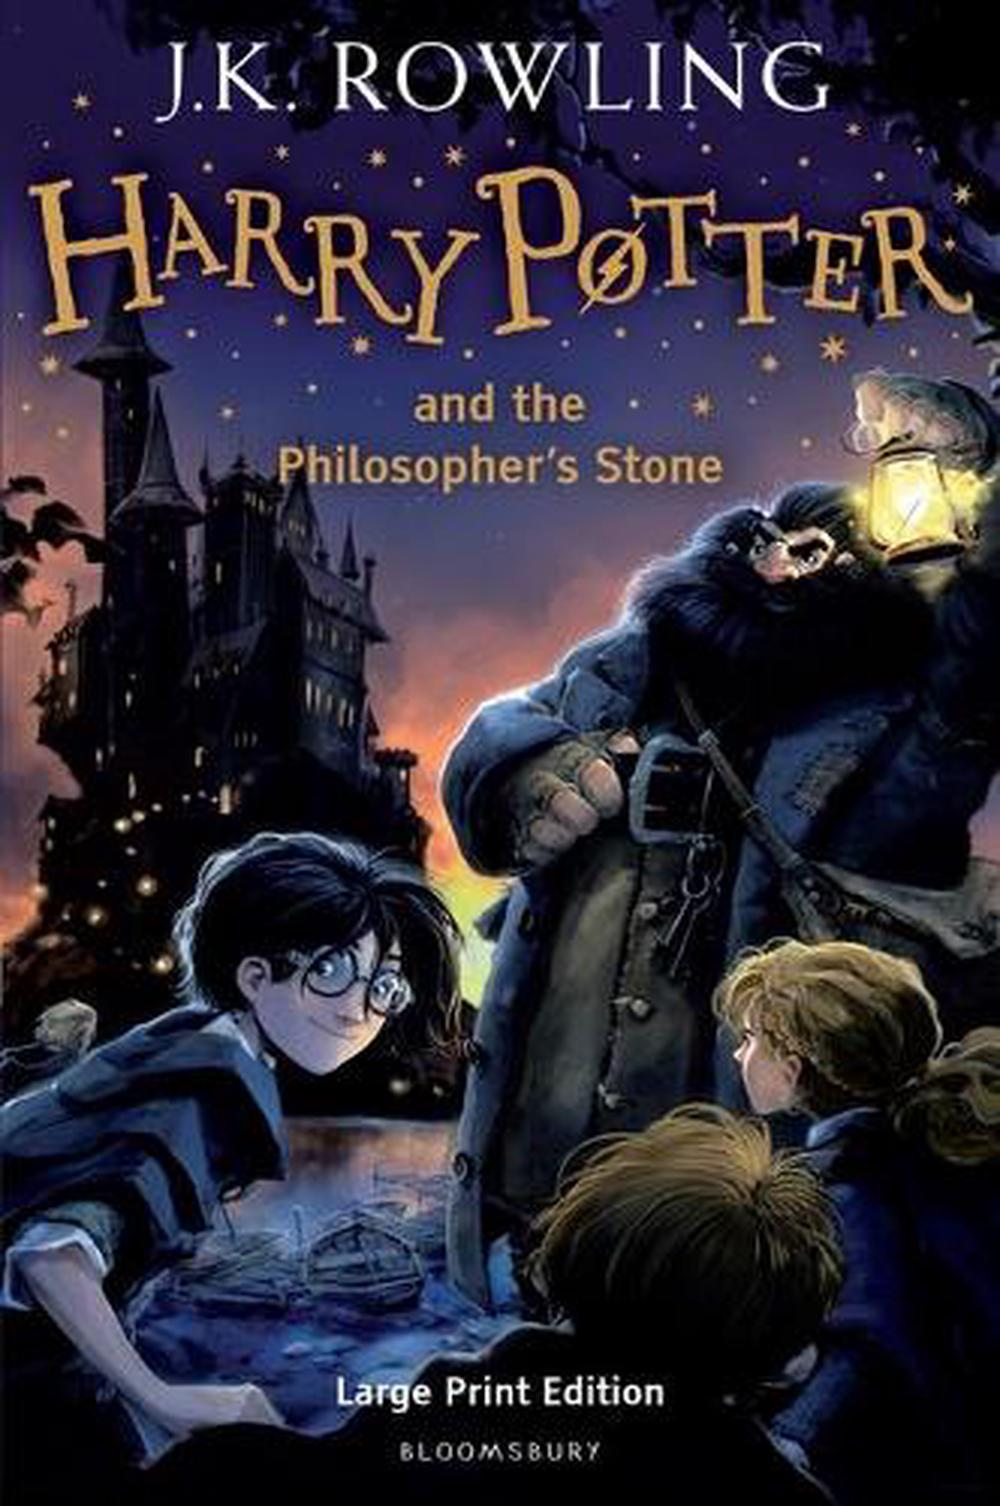 Harry Potter and the Philosopher's Stone by J.K. Rowling ...